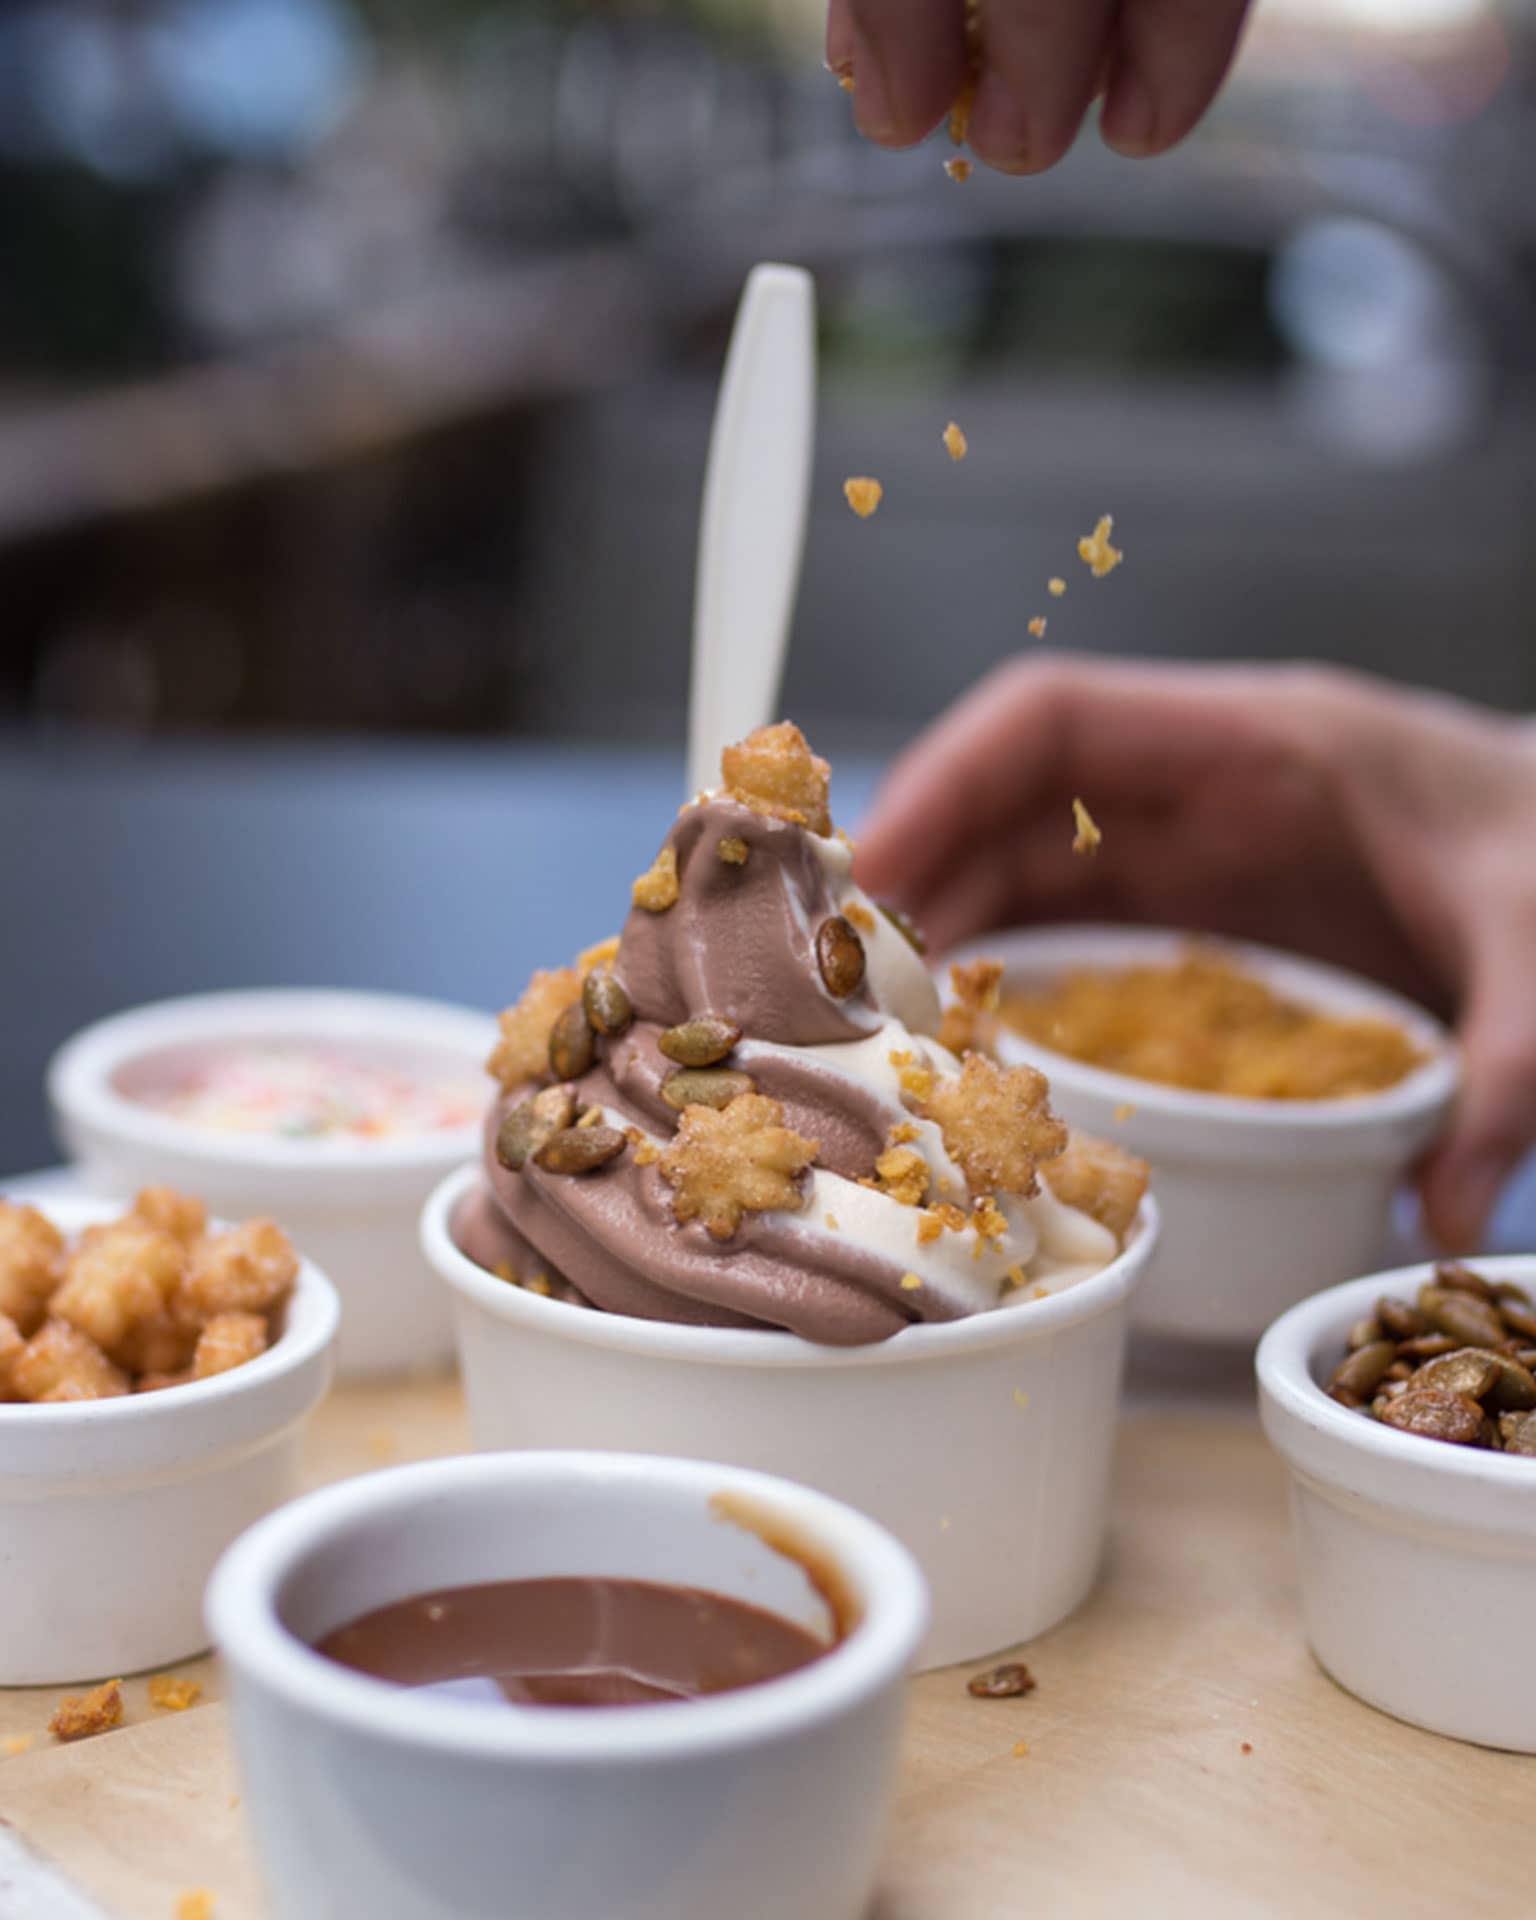 Hand pouring toppings onto bowl of soft serve